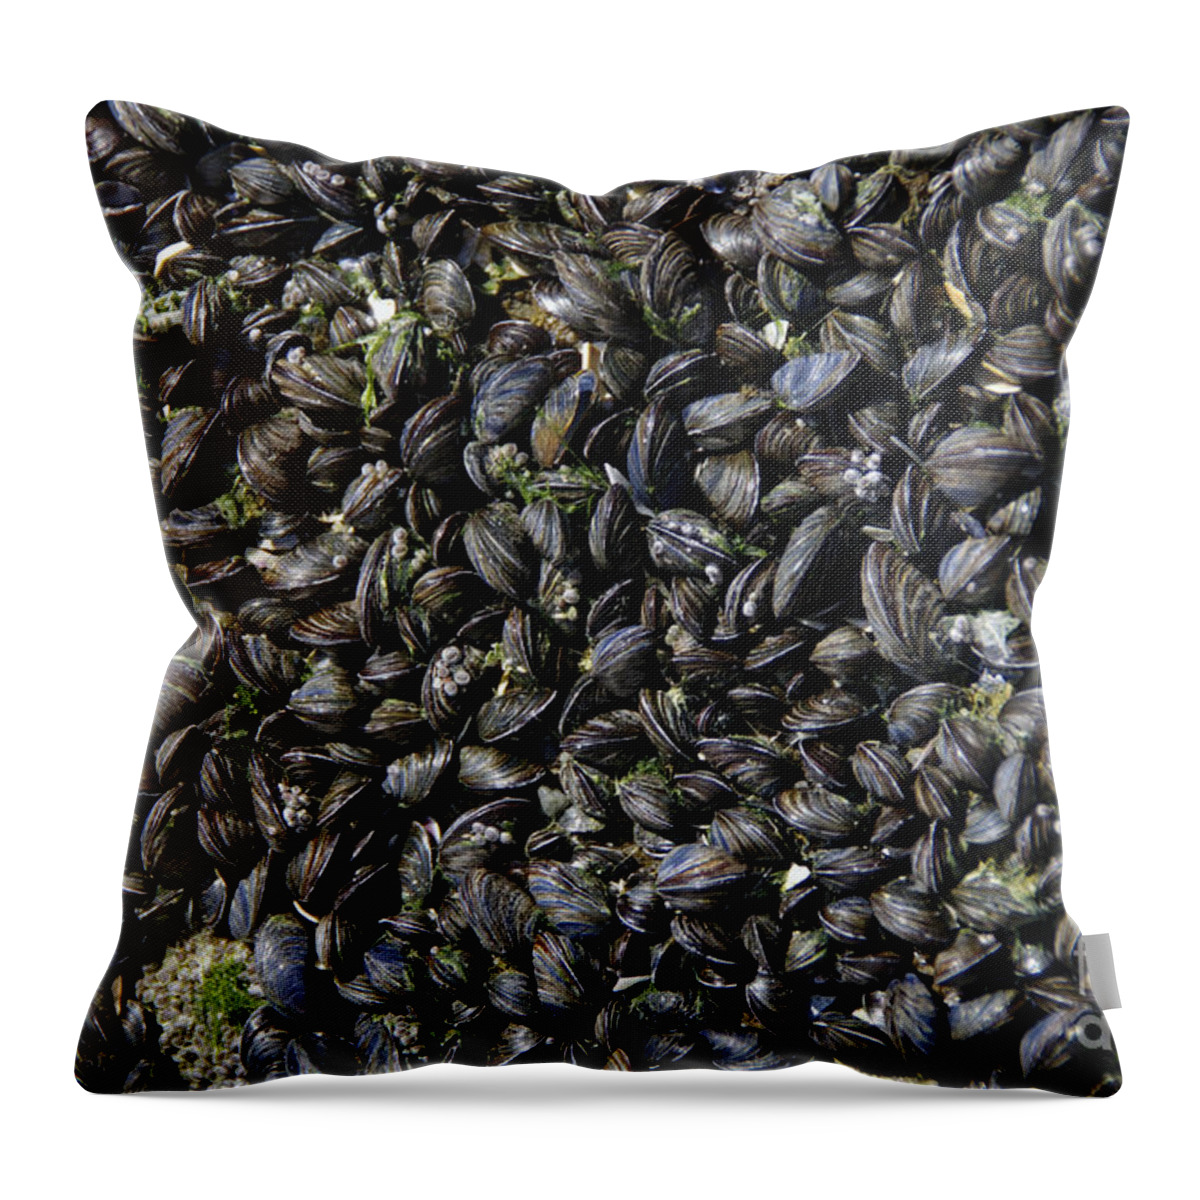 Mussel Throw Pillow featuring the photograph Show Us Your Mussels by Scott Evers